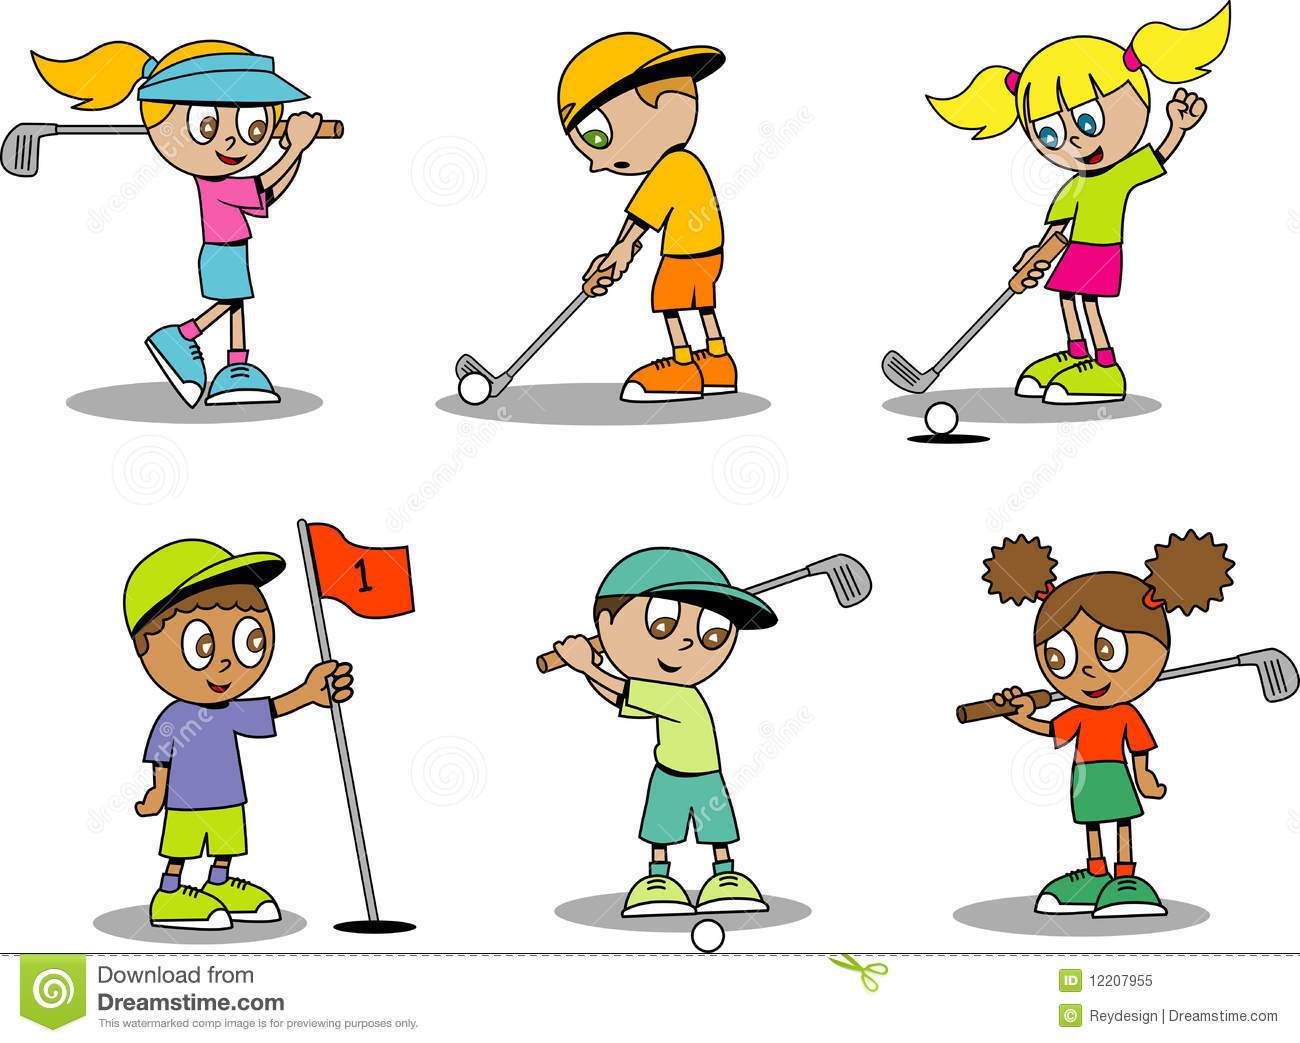 Kids playing golf clipart